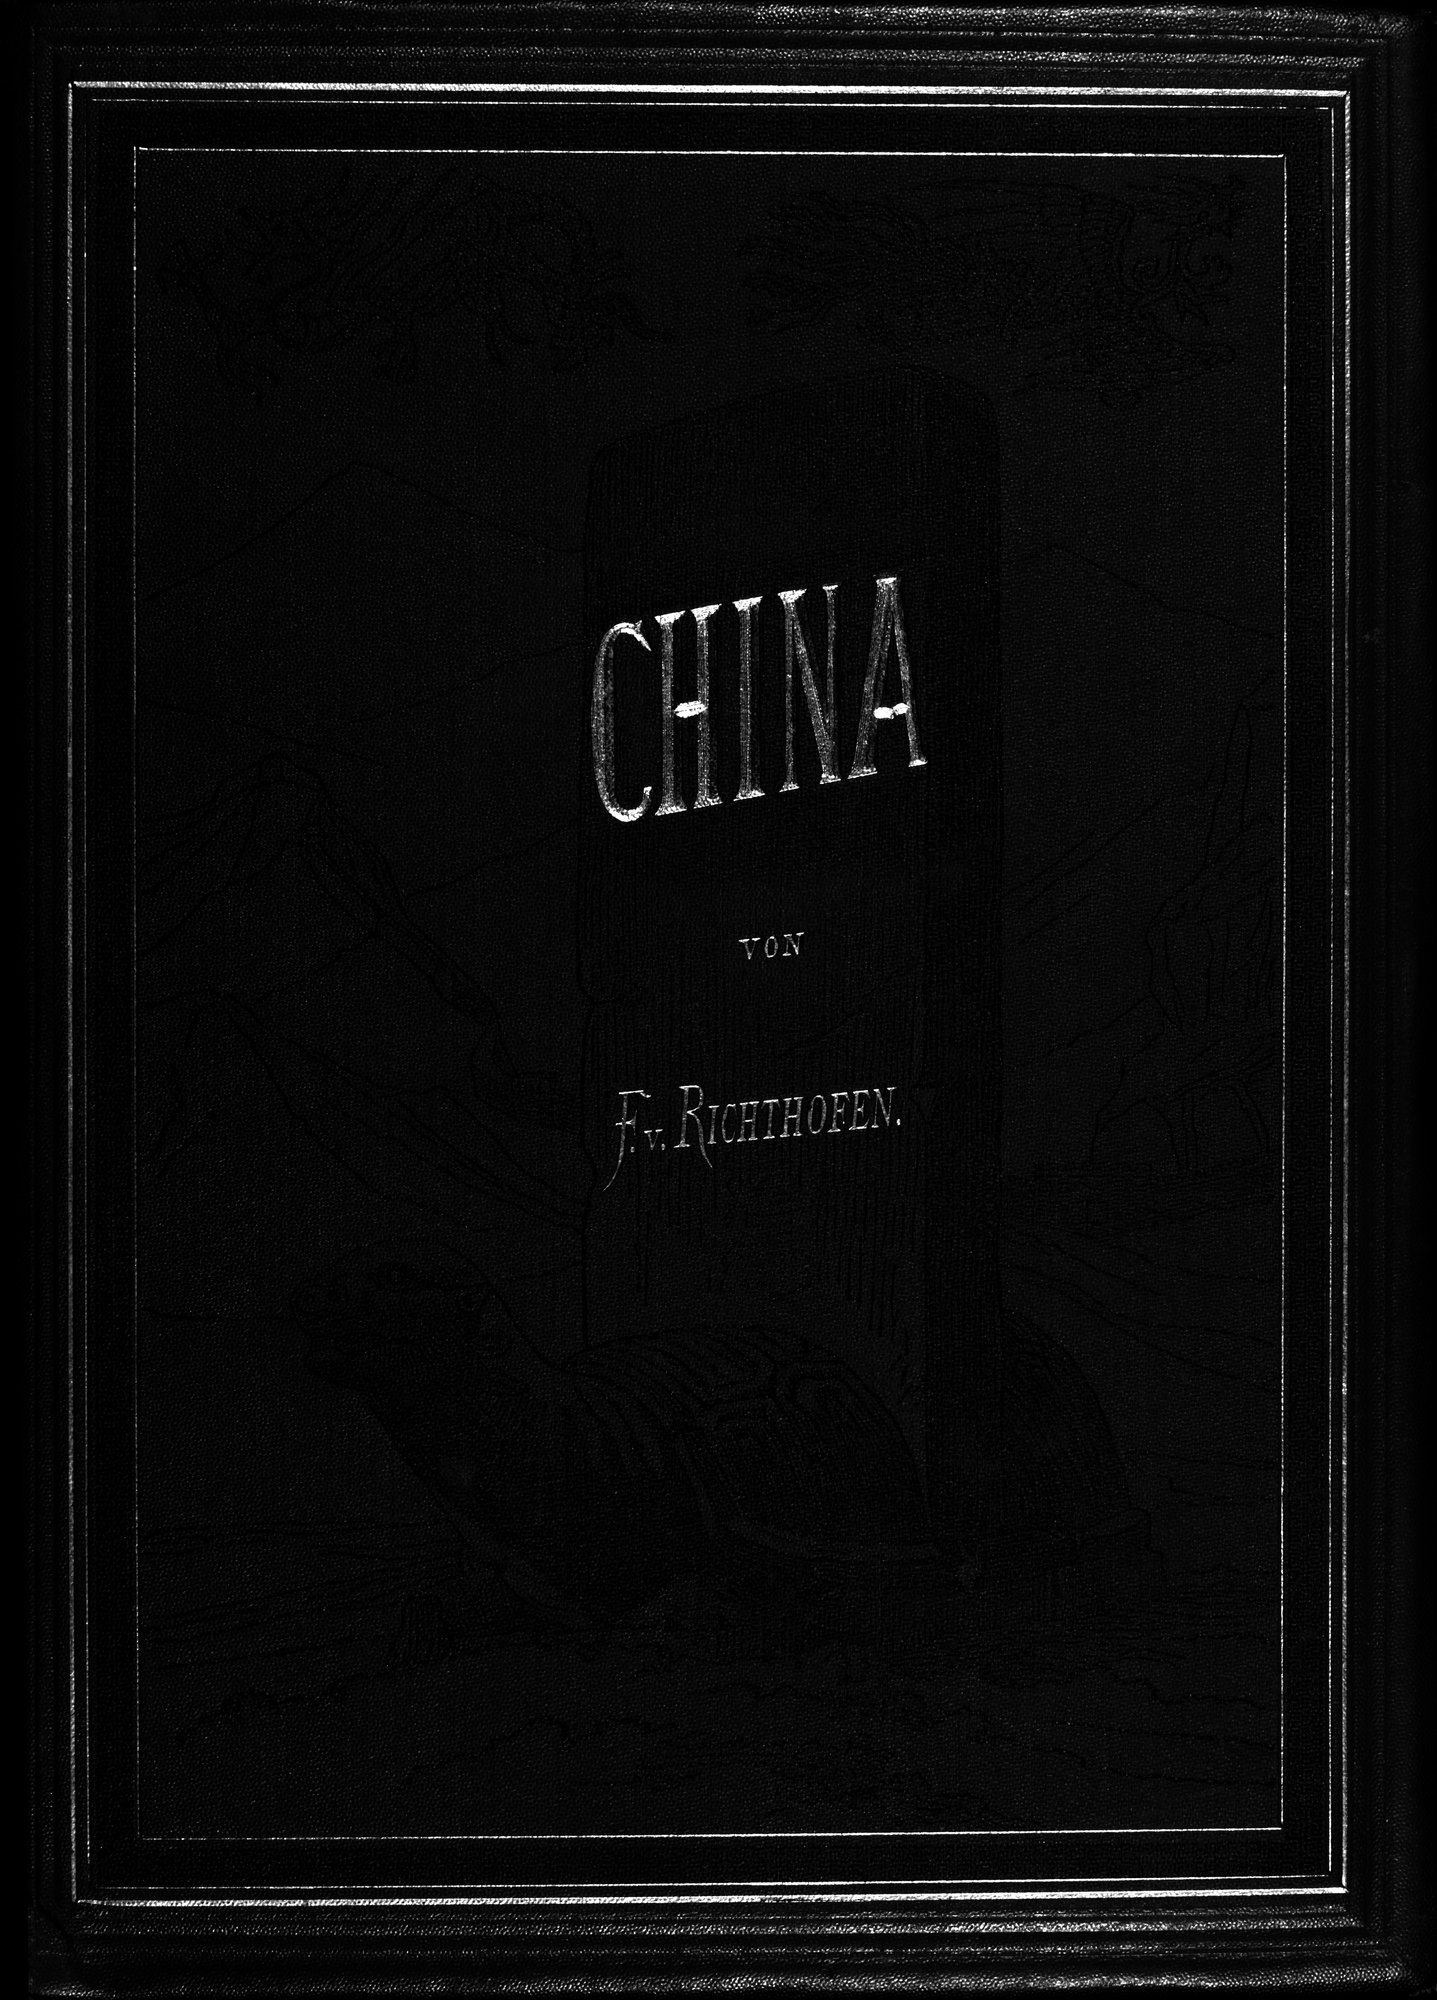 China : vol.3 / Page 1 (Grayscale High Resolution Image)